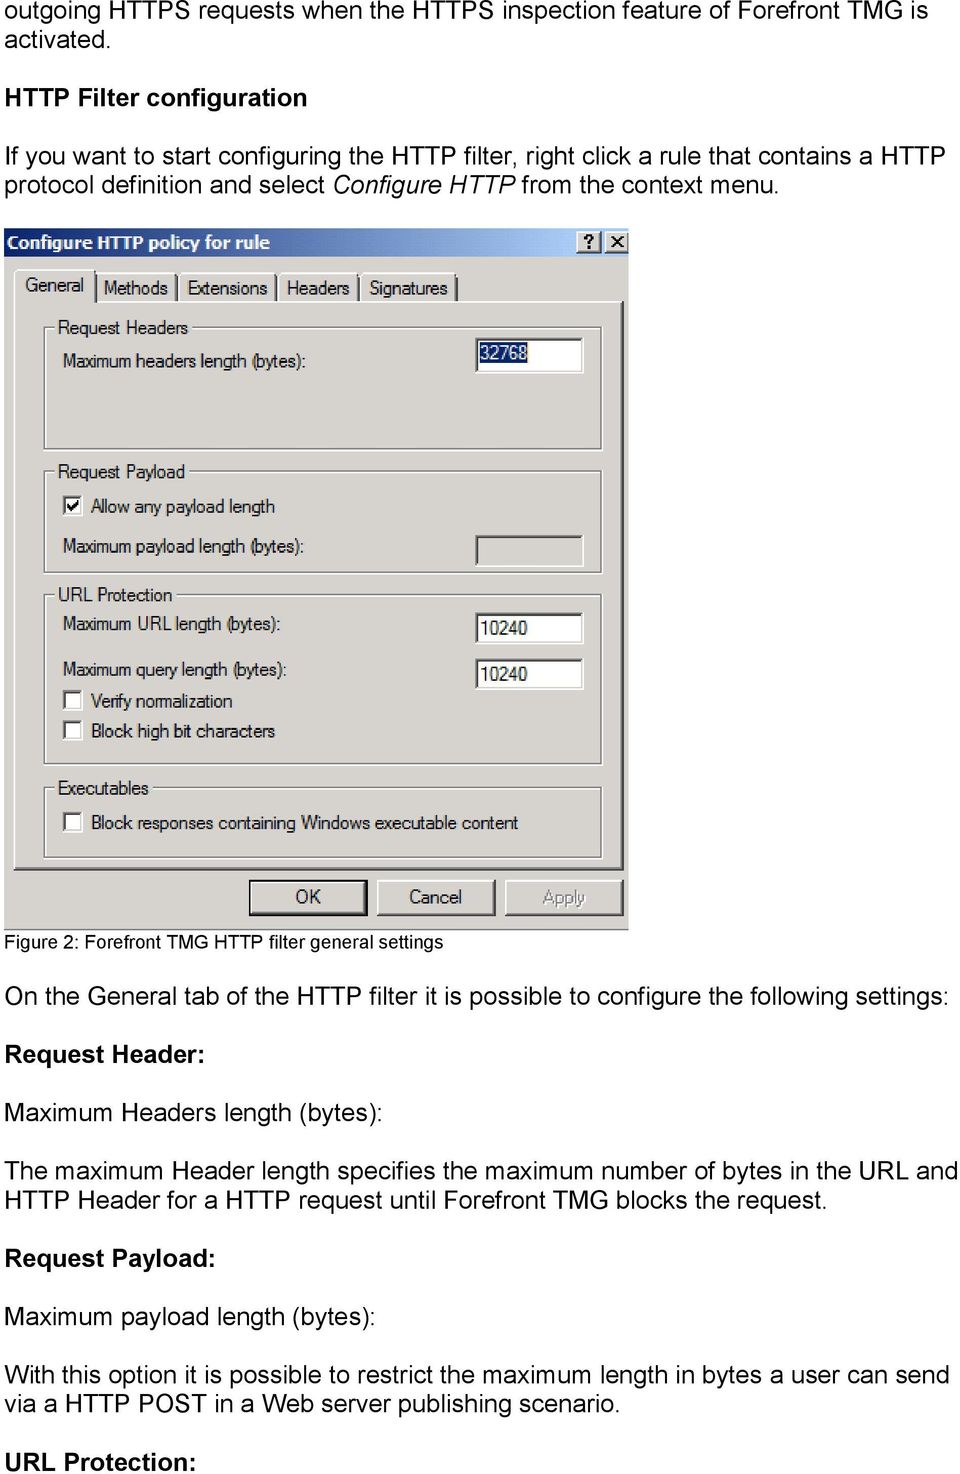 Figure 2: Forefront TMG HTTP filter general settings On the General tab of the HTTP filter it is possible to configure the following settings: Request Header: Maximum Headers length (bytes): The